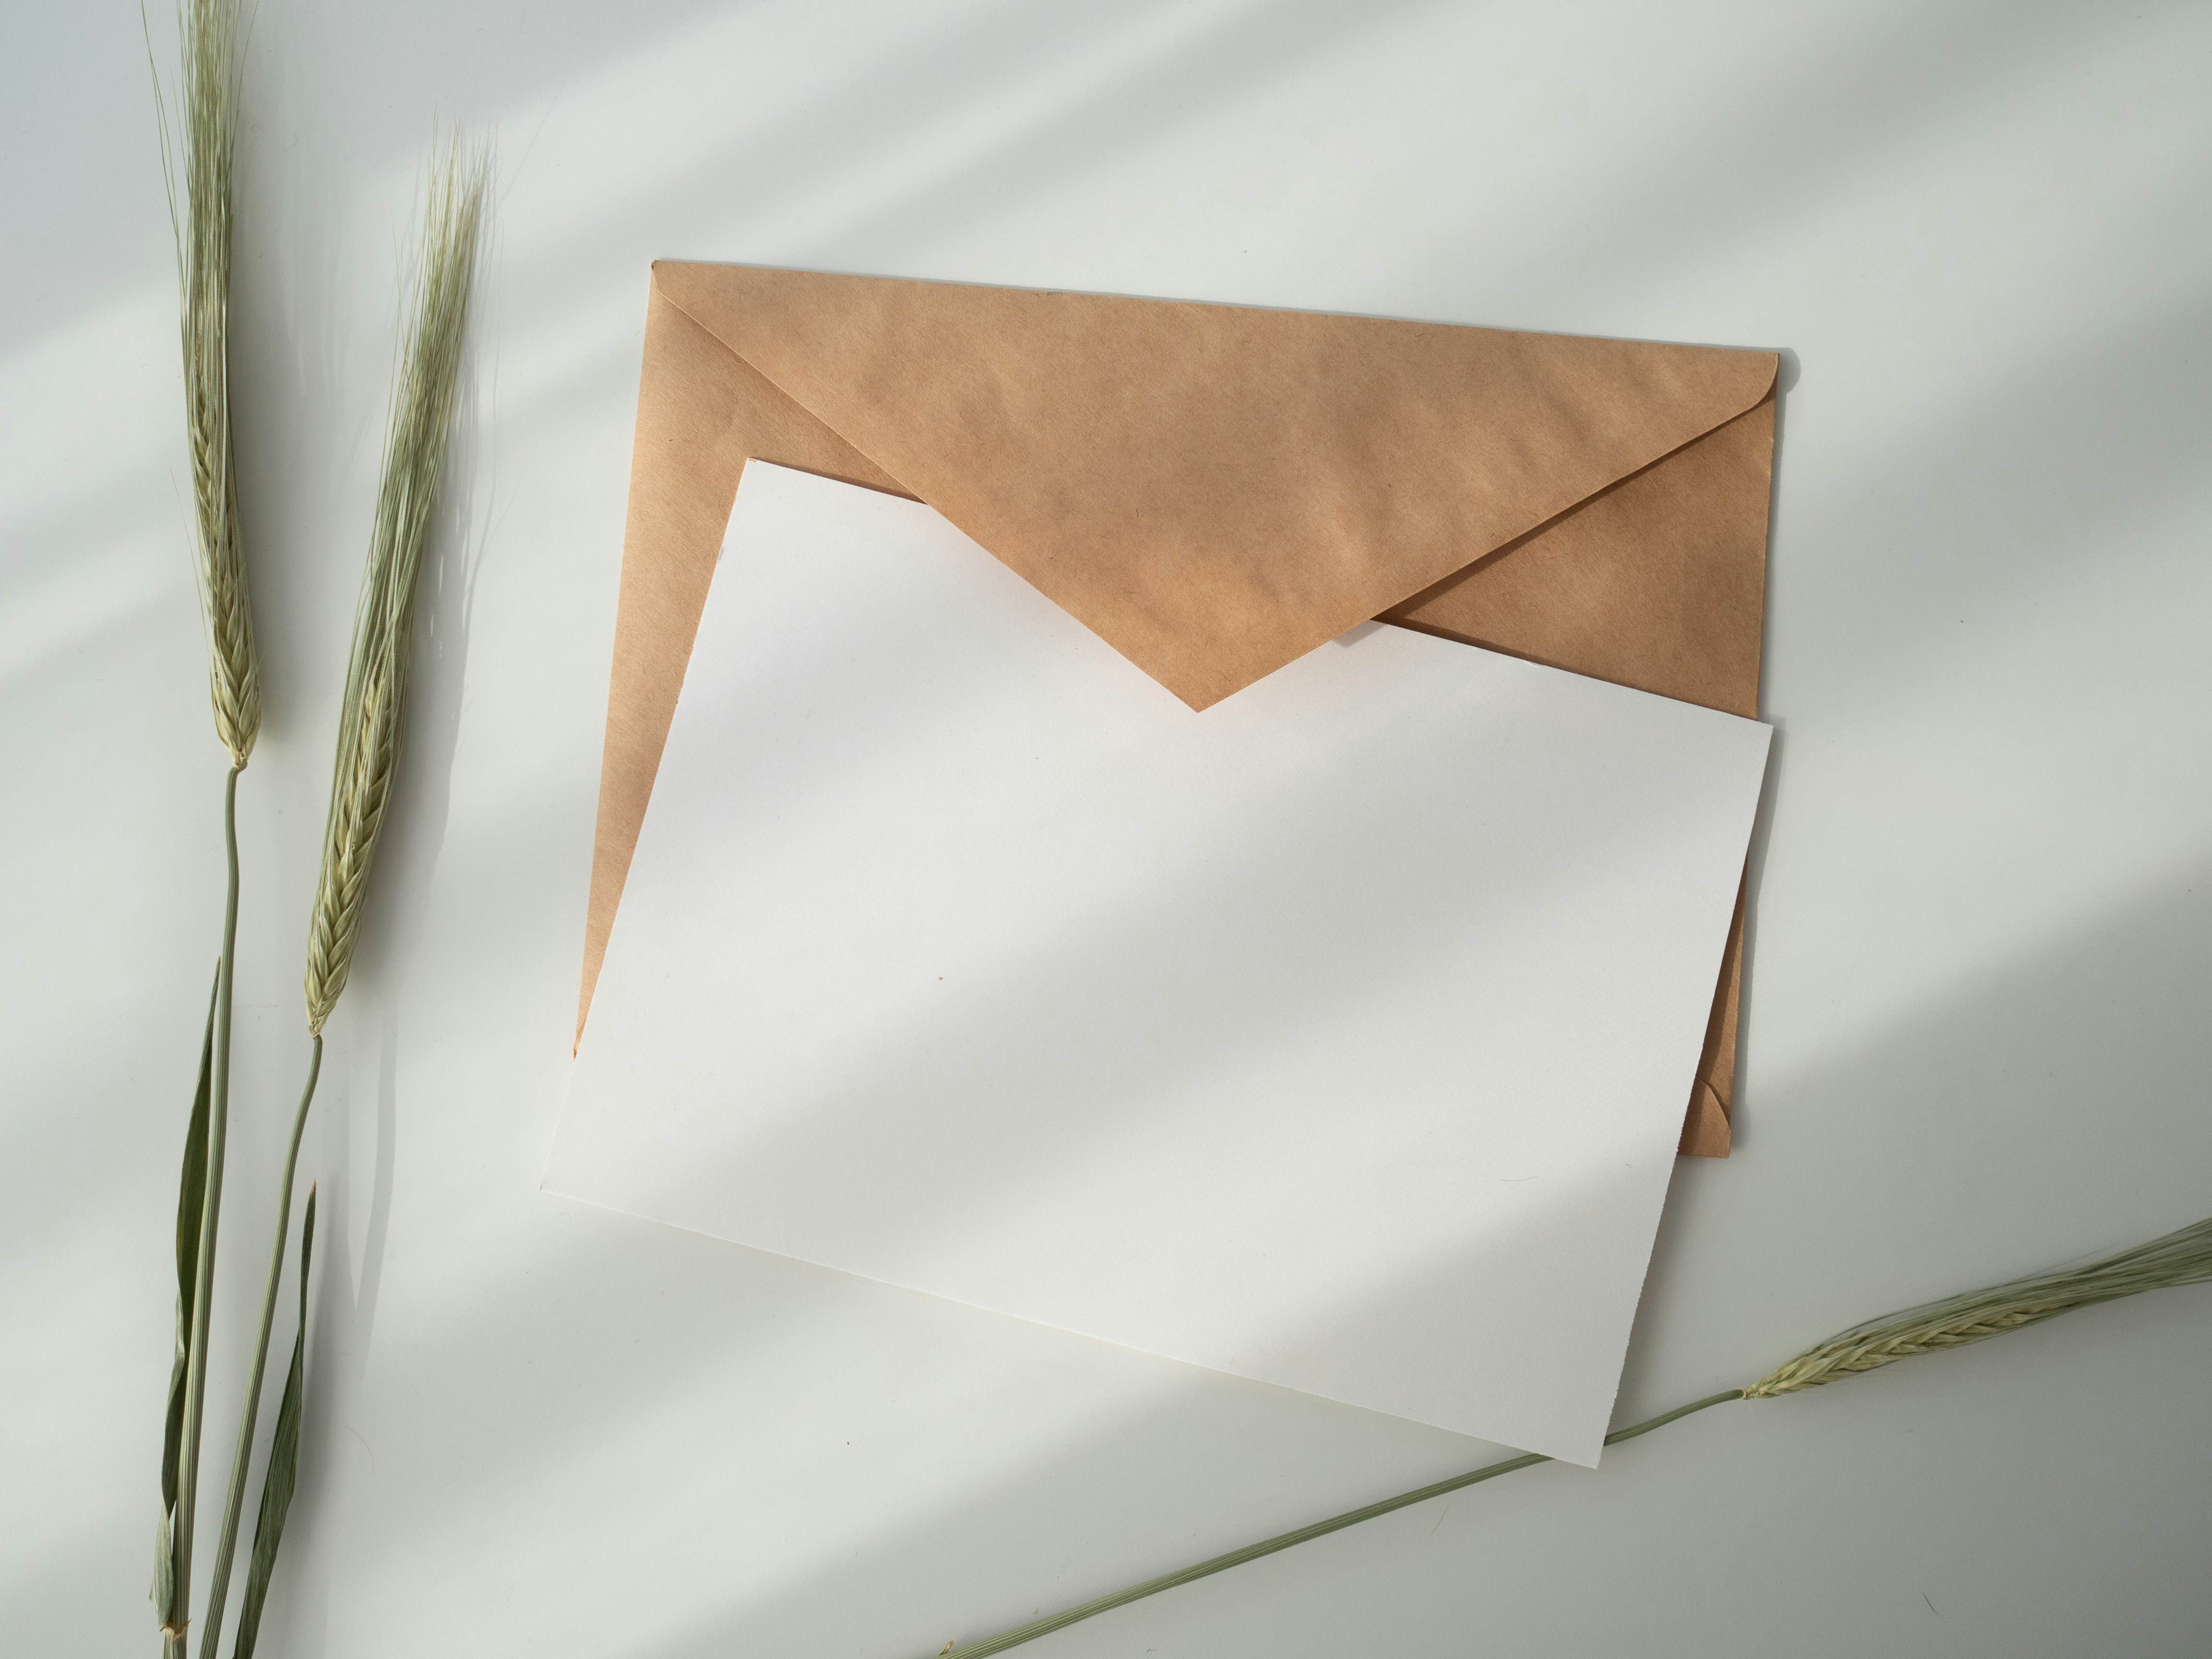 An envelope with a note inside | Source: Unsplash